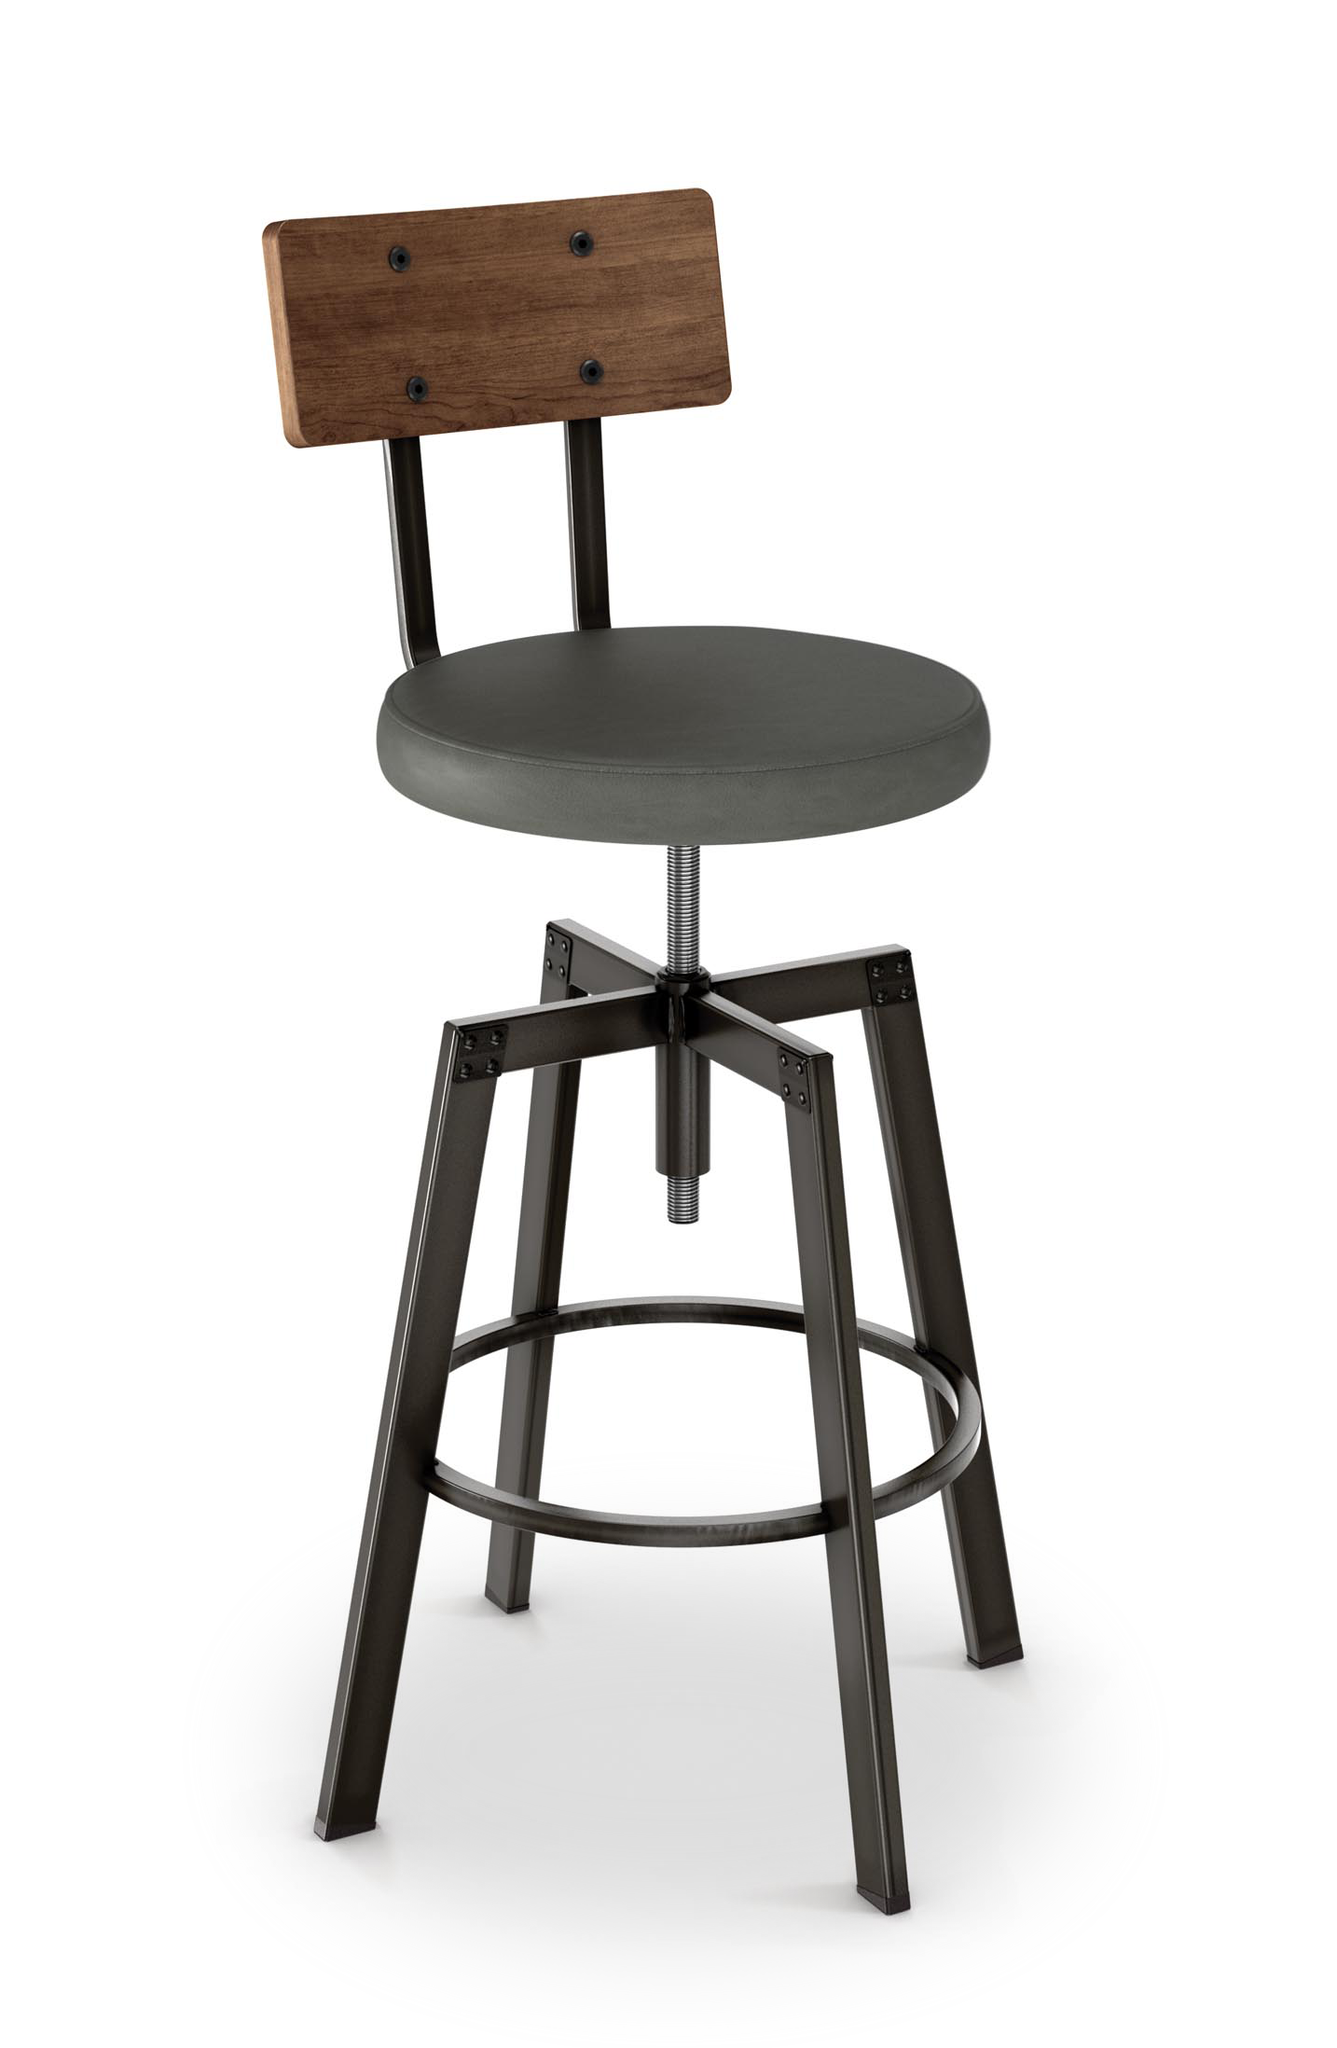 Picture of Architect Screw Stool - Wood/Upholstered